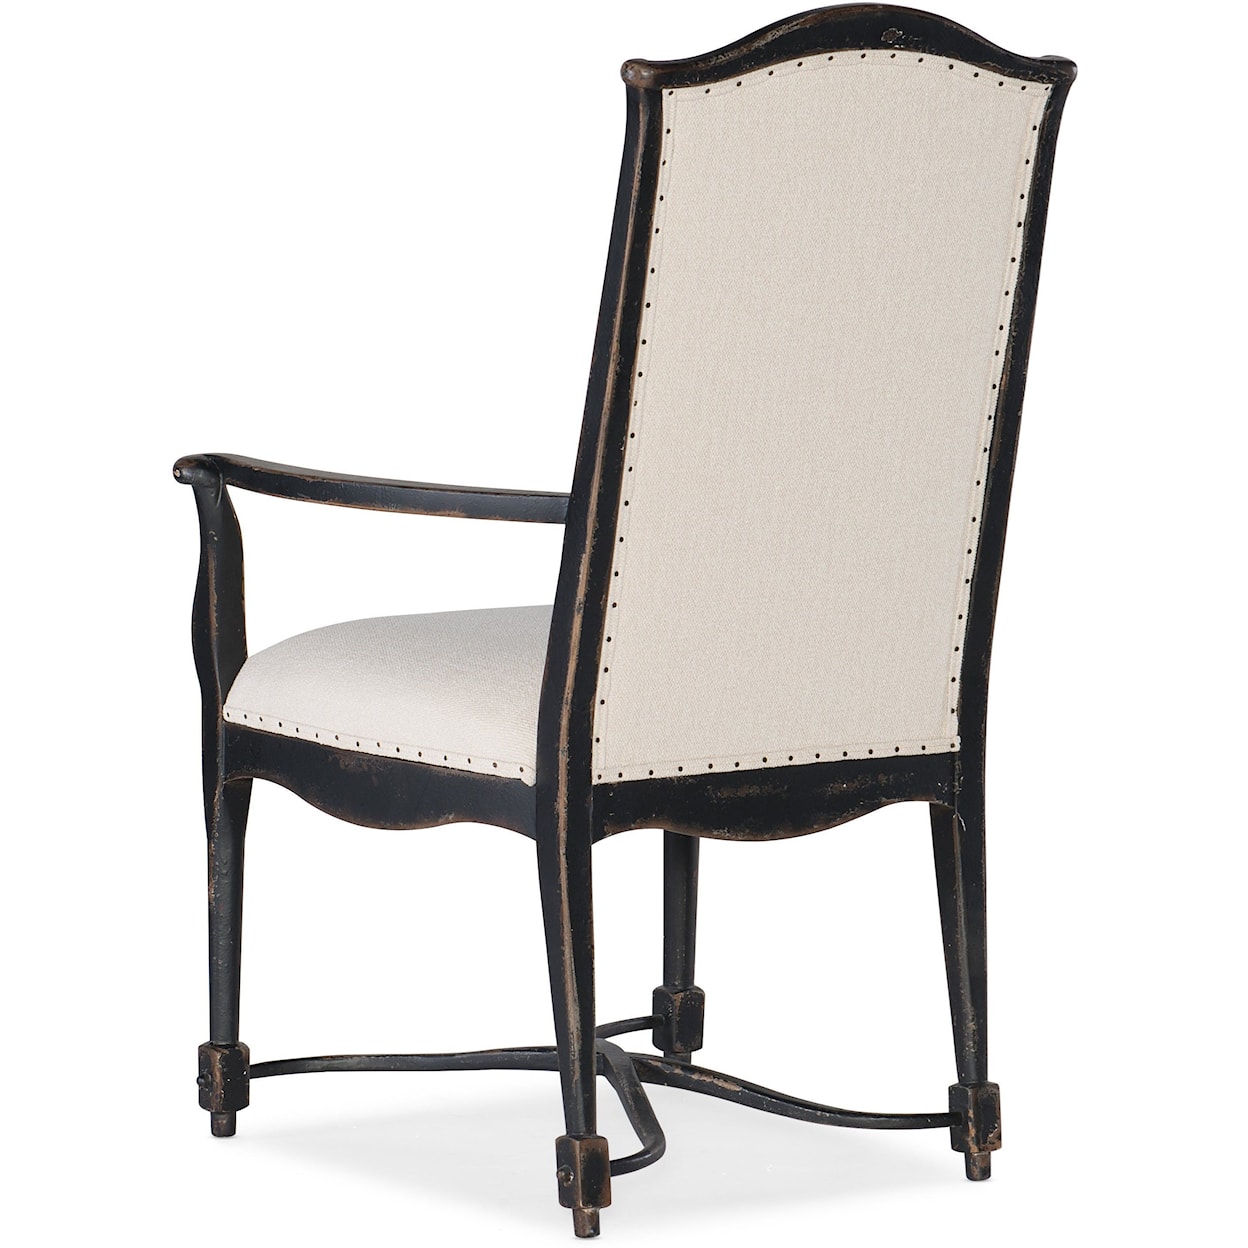 Hooker Furniture Ciao Bella Upholstered Back Arm Chair